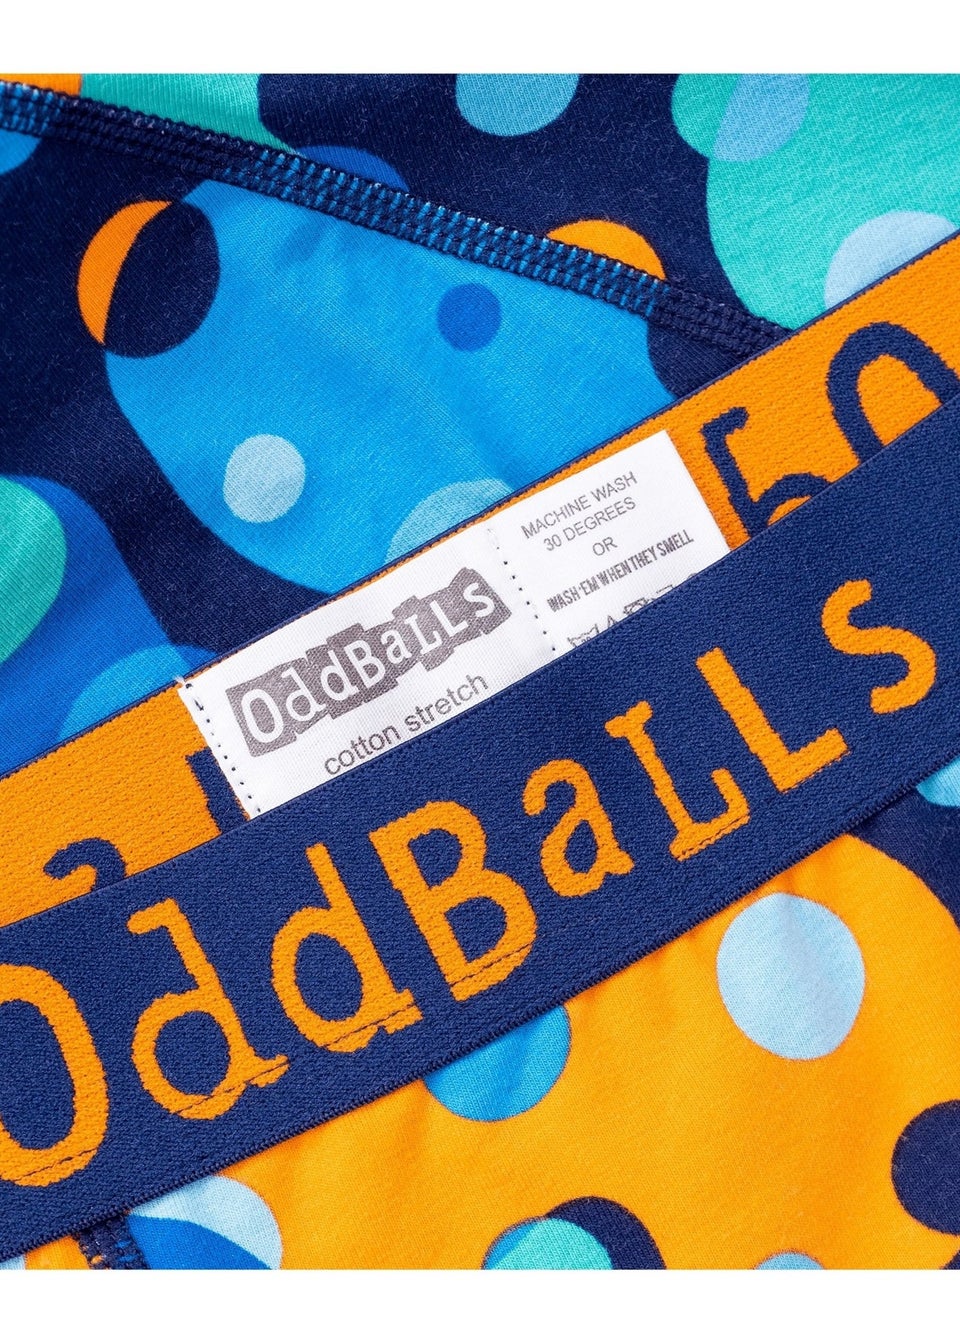 OddBalls Blue Space Balls Spotted Boxer Shorts